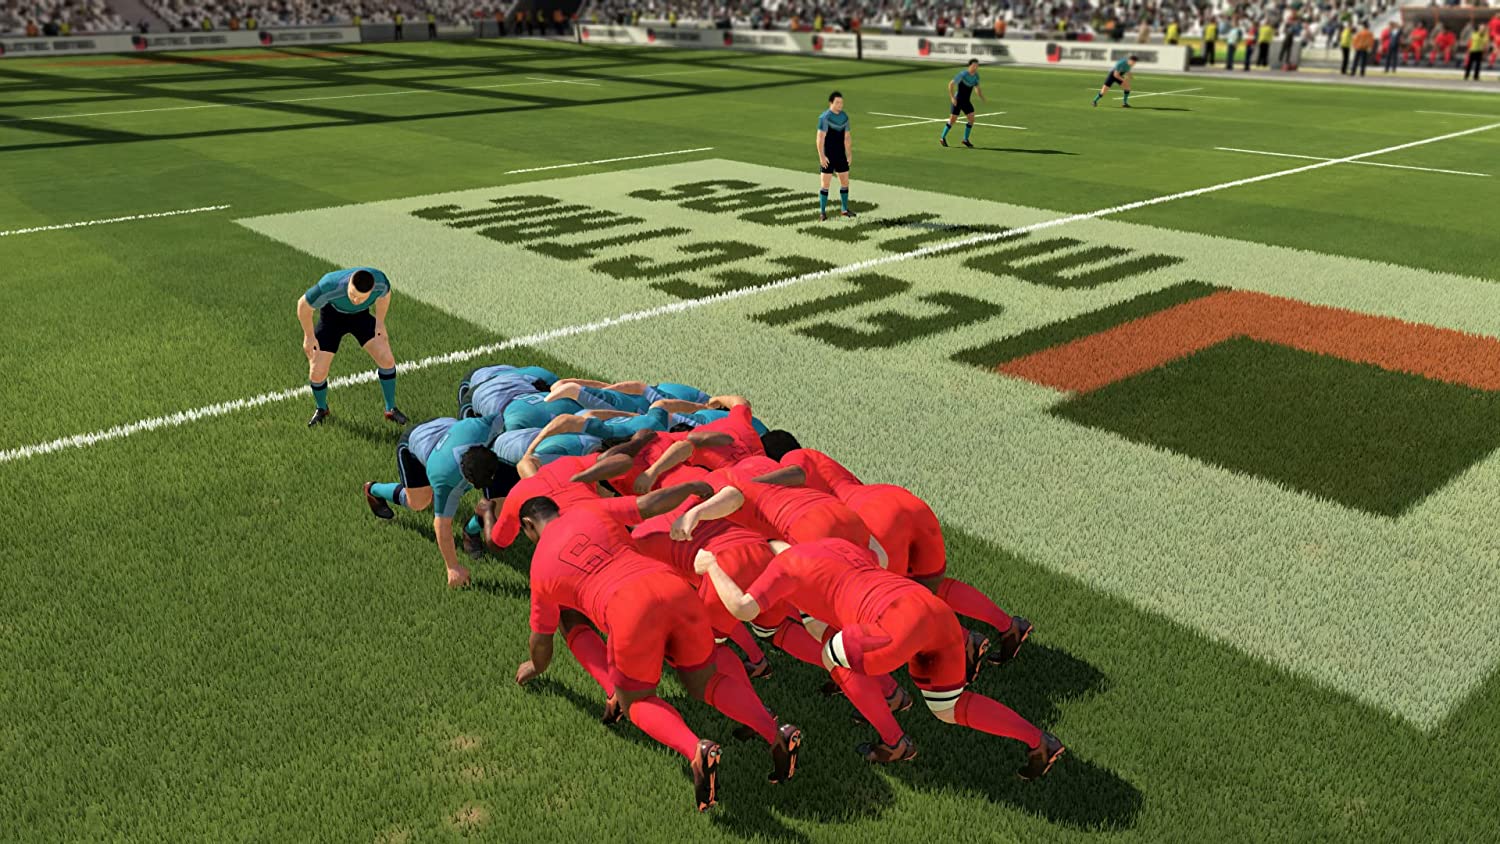 Rugby 22 (PS5)